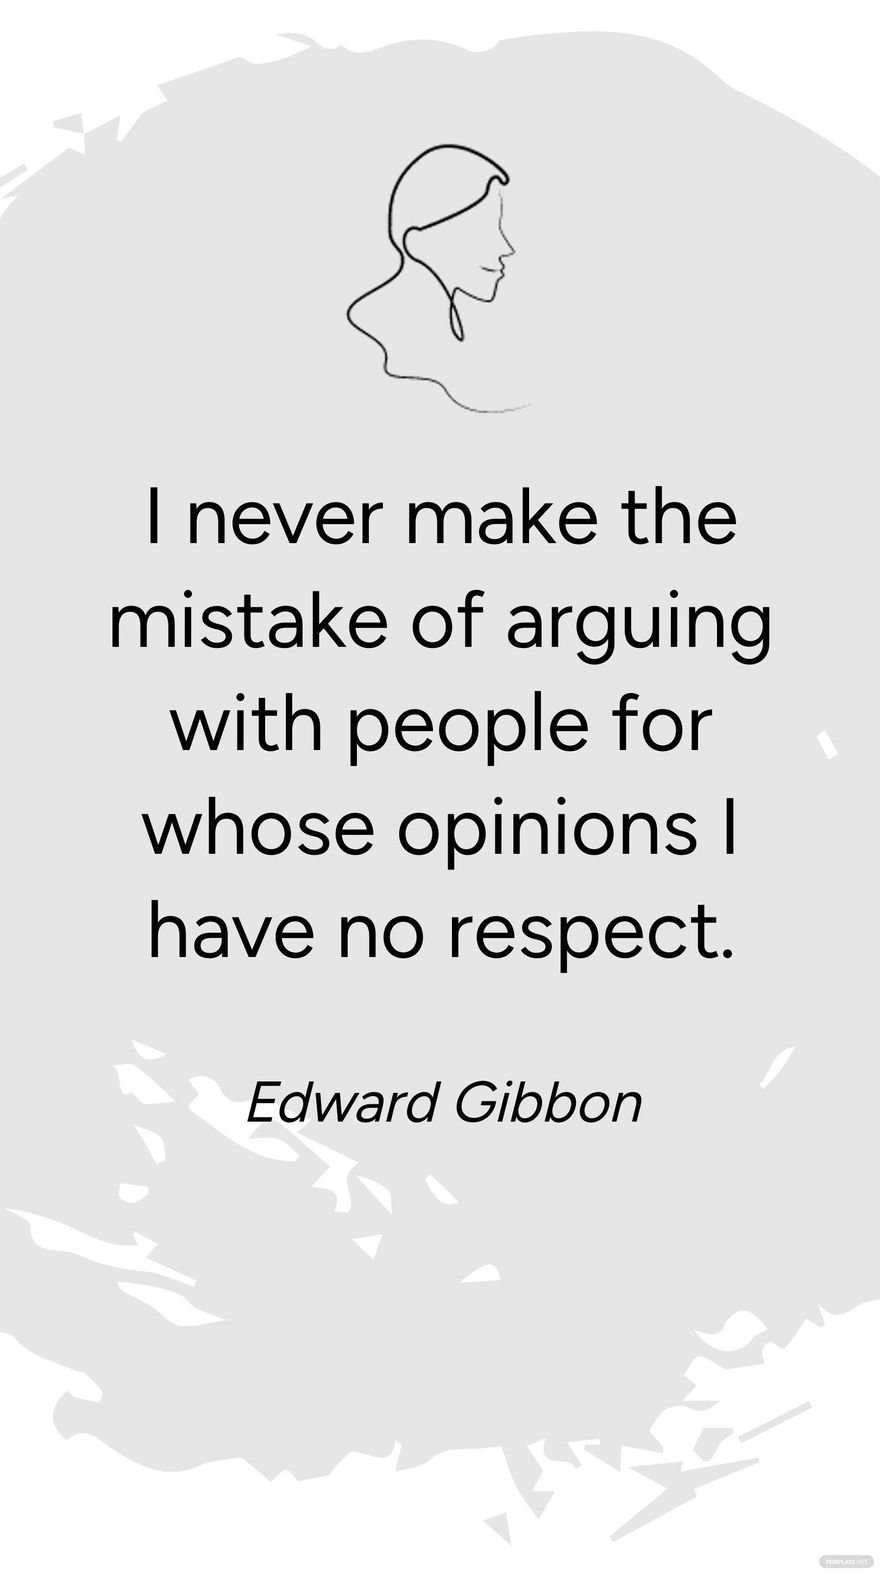 Free Edward Gibbon - I never make the mistake of arguing with people for whose opinions I have no respect. in JPG